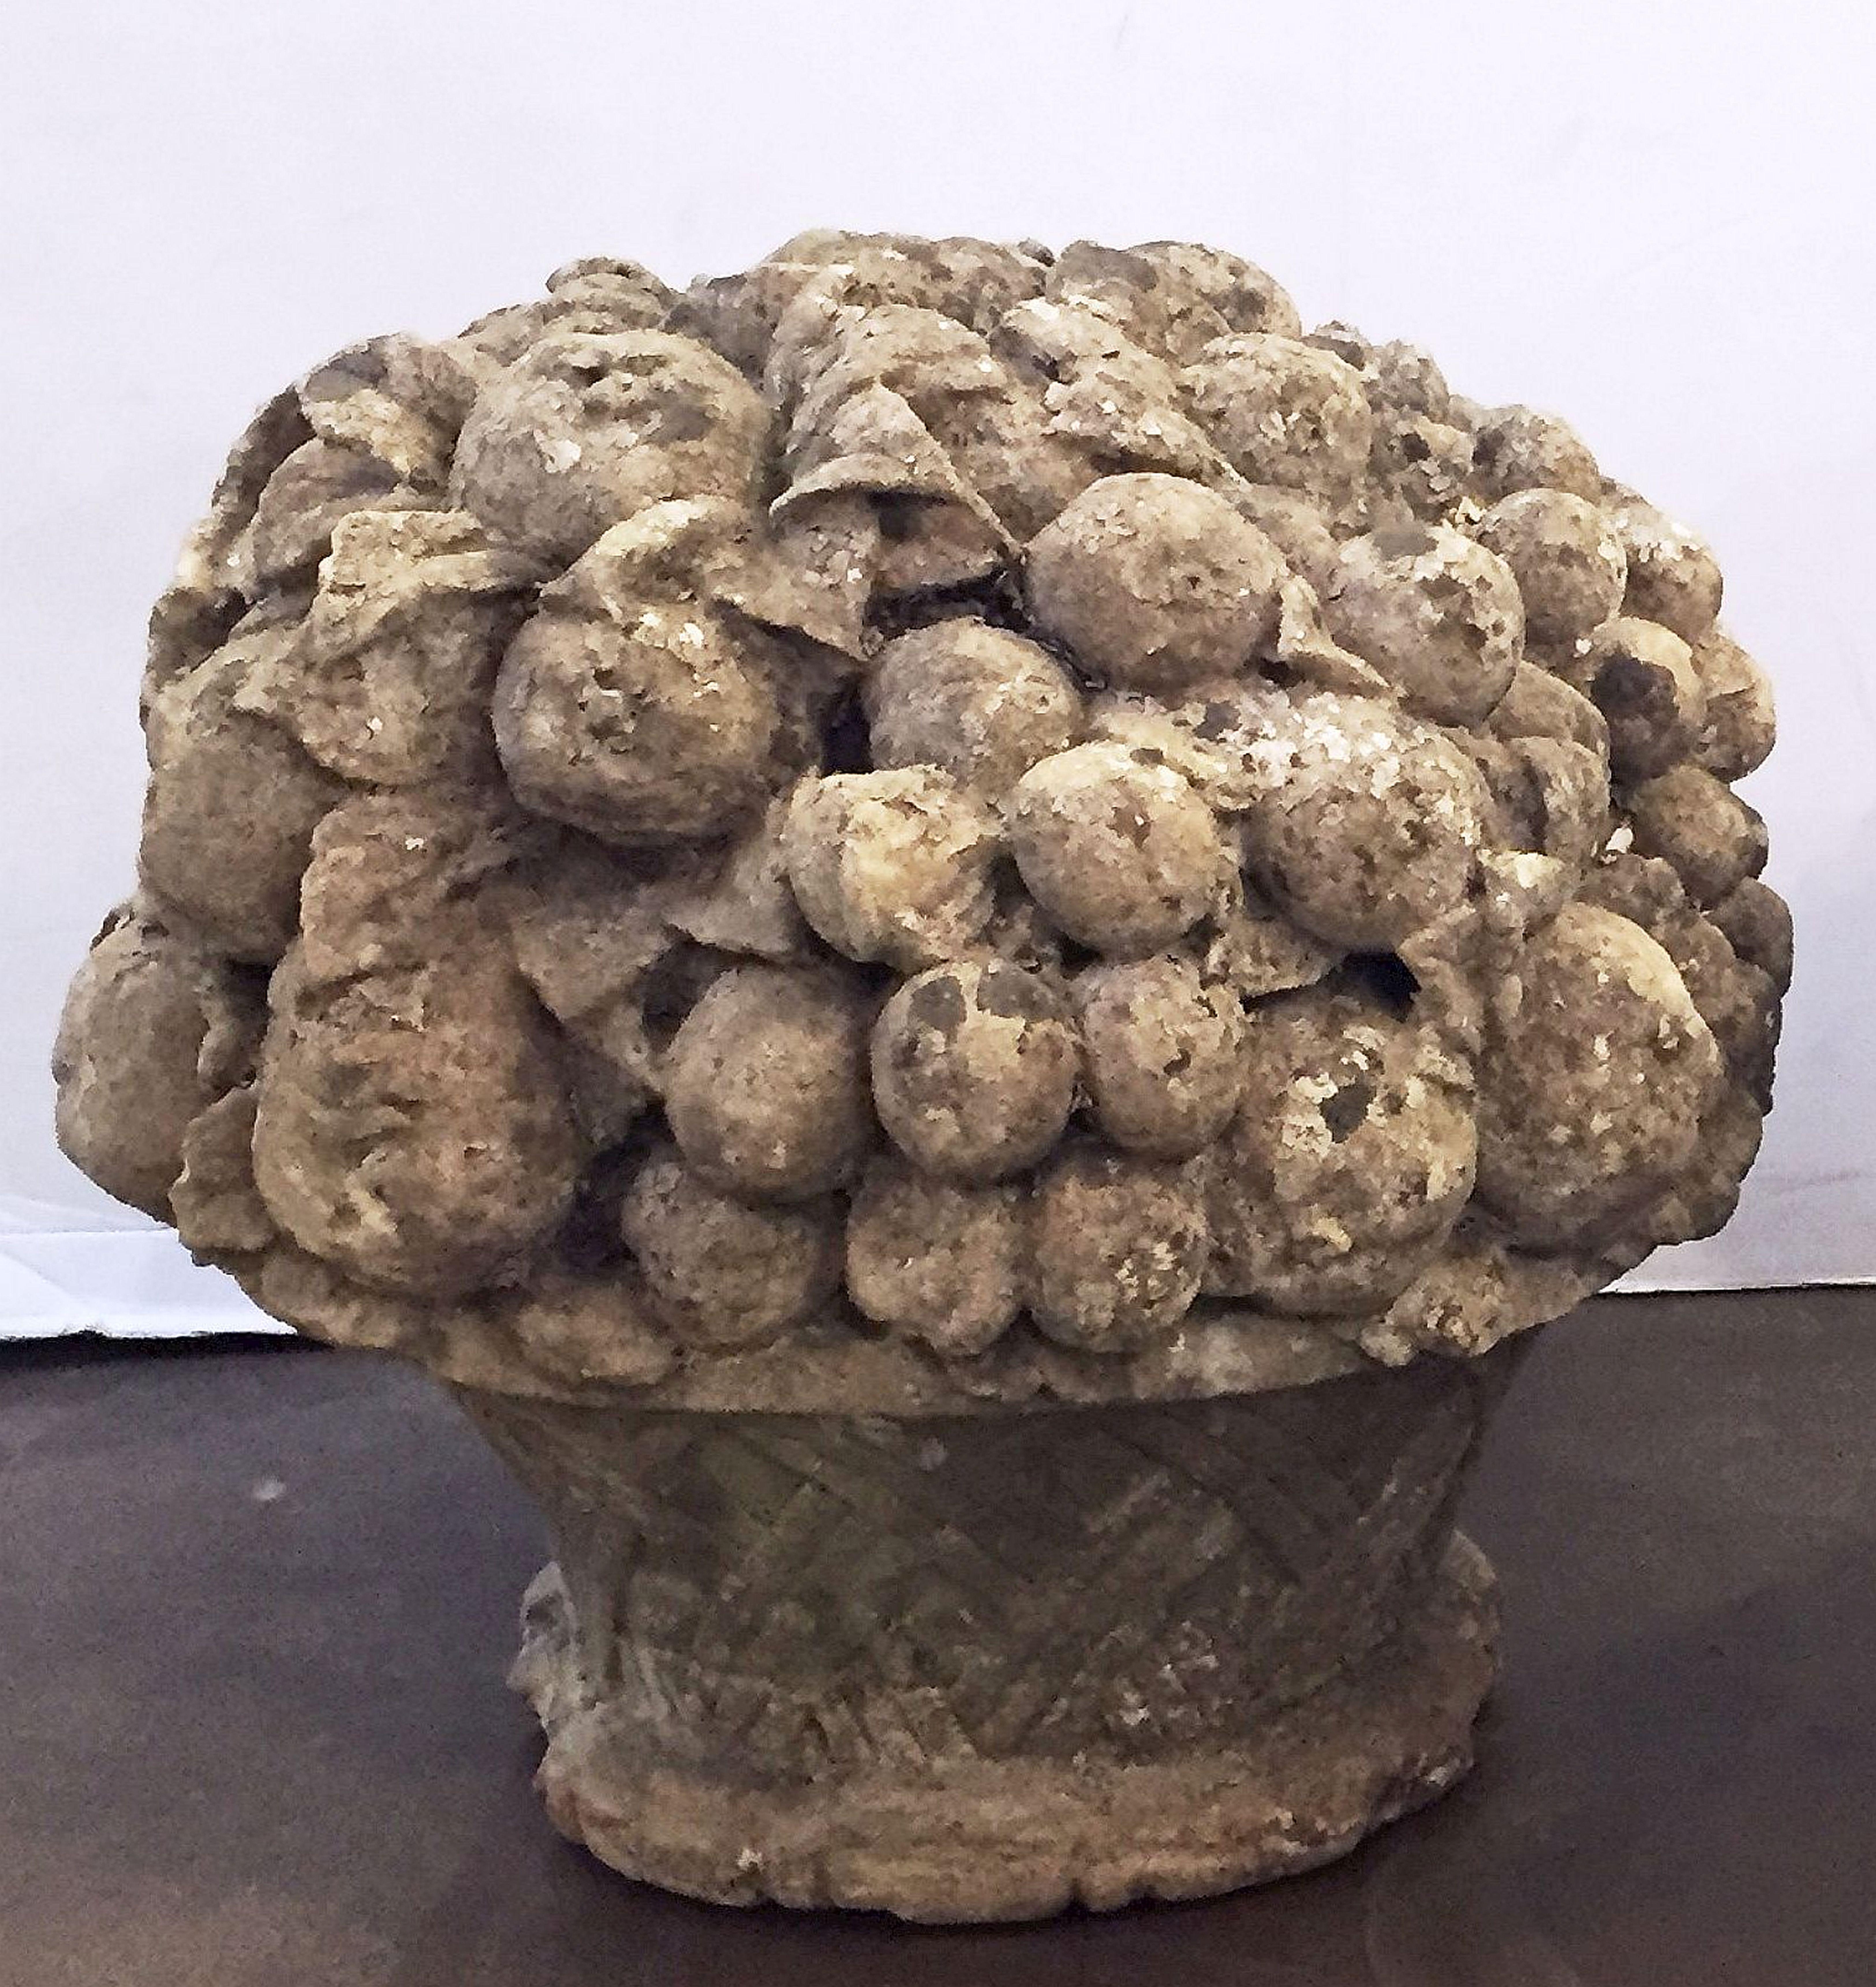 An English garden ornamental sculpture of a fruit basket (or bouquet) - of composition stone - featuring a variety of stone fruit upon a woven basket.

Perfect for display in an indoor or outdoor garden, garden room, or conservatory!



